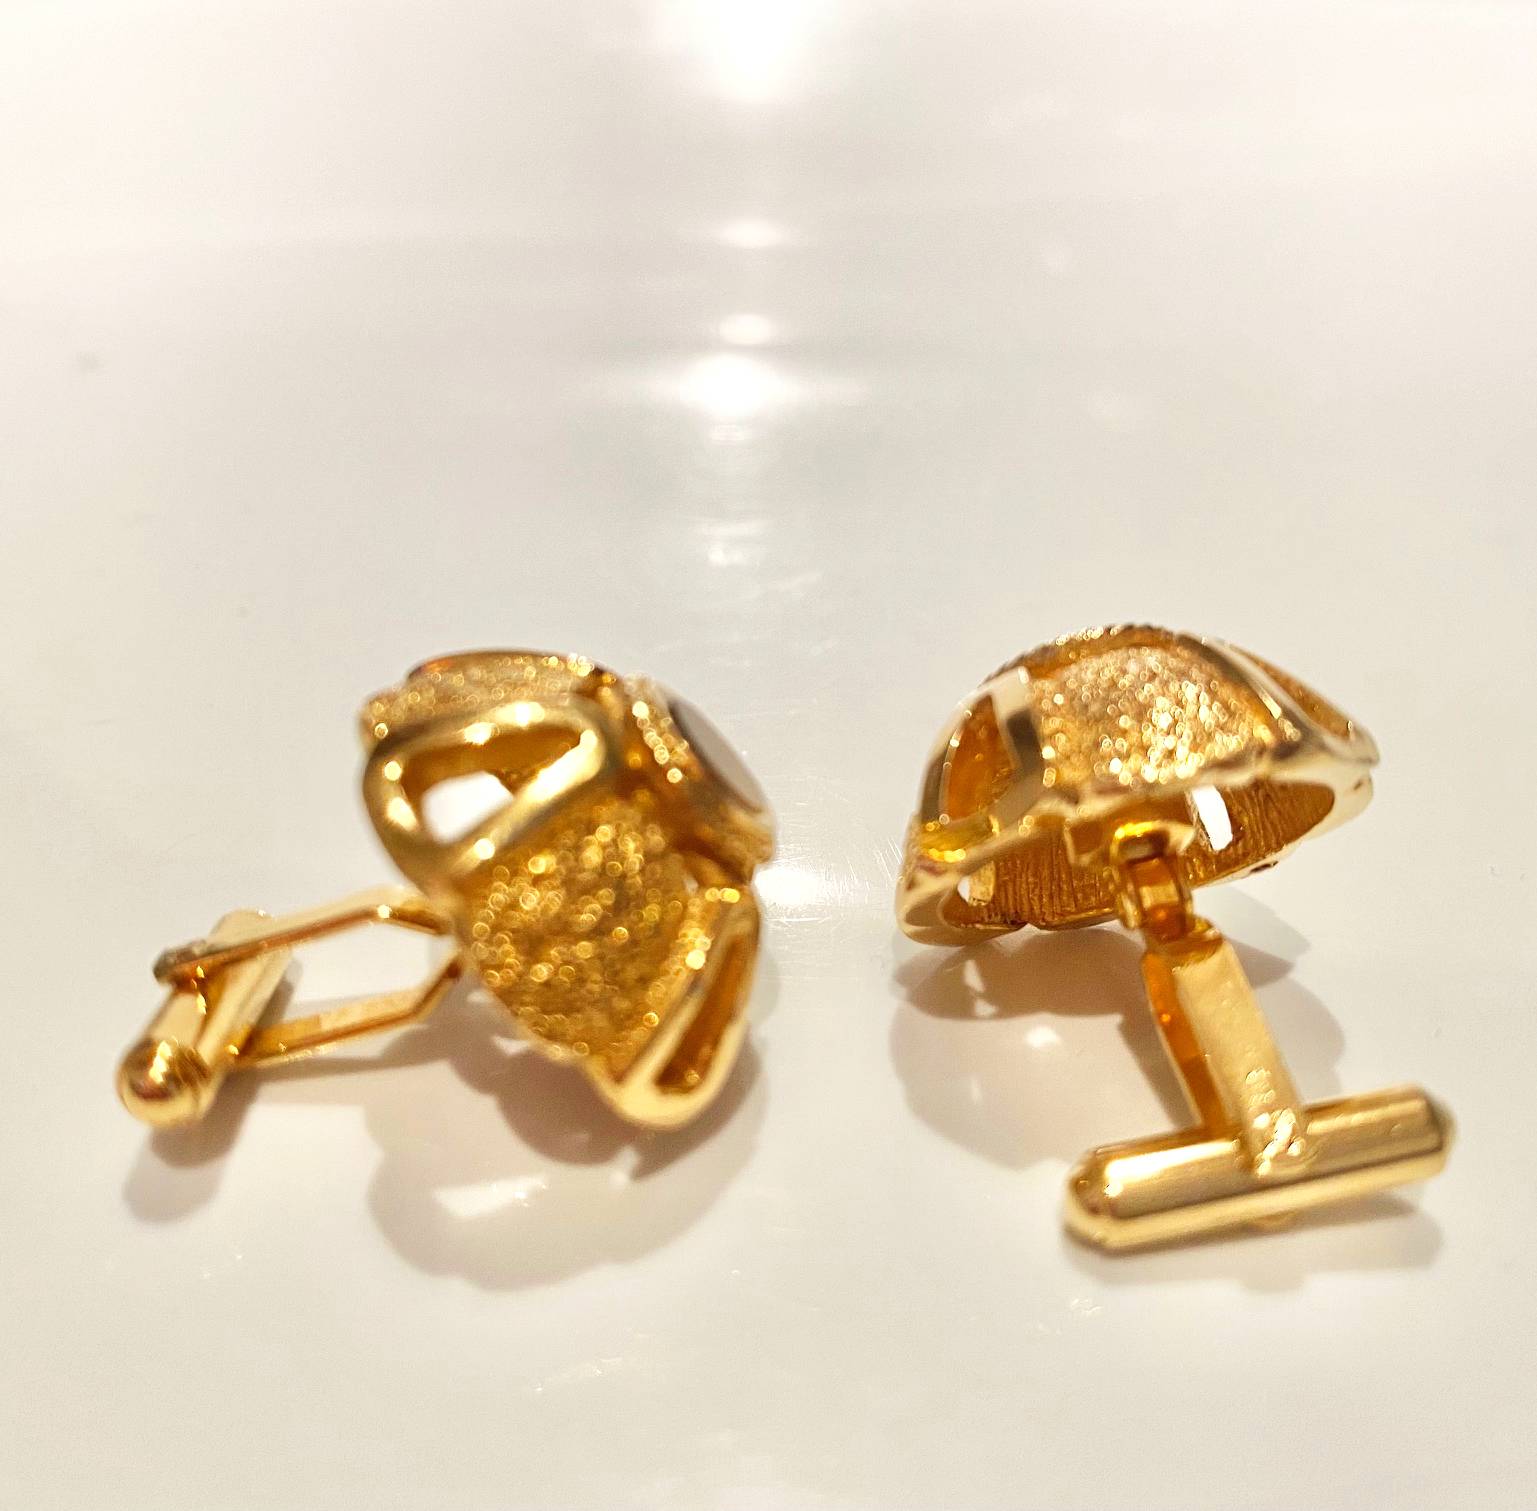 1980s Christian Dior Gold Plated Tiger's Eye Cufflinks - style - CHNGR